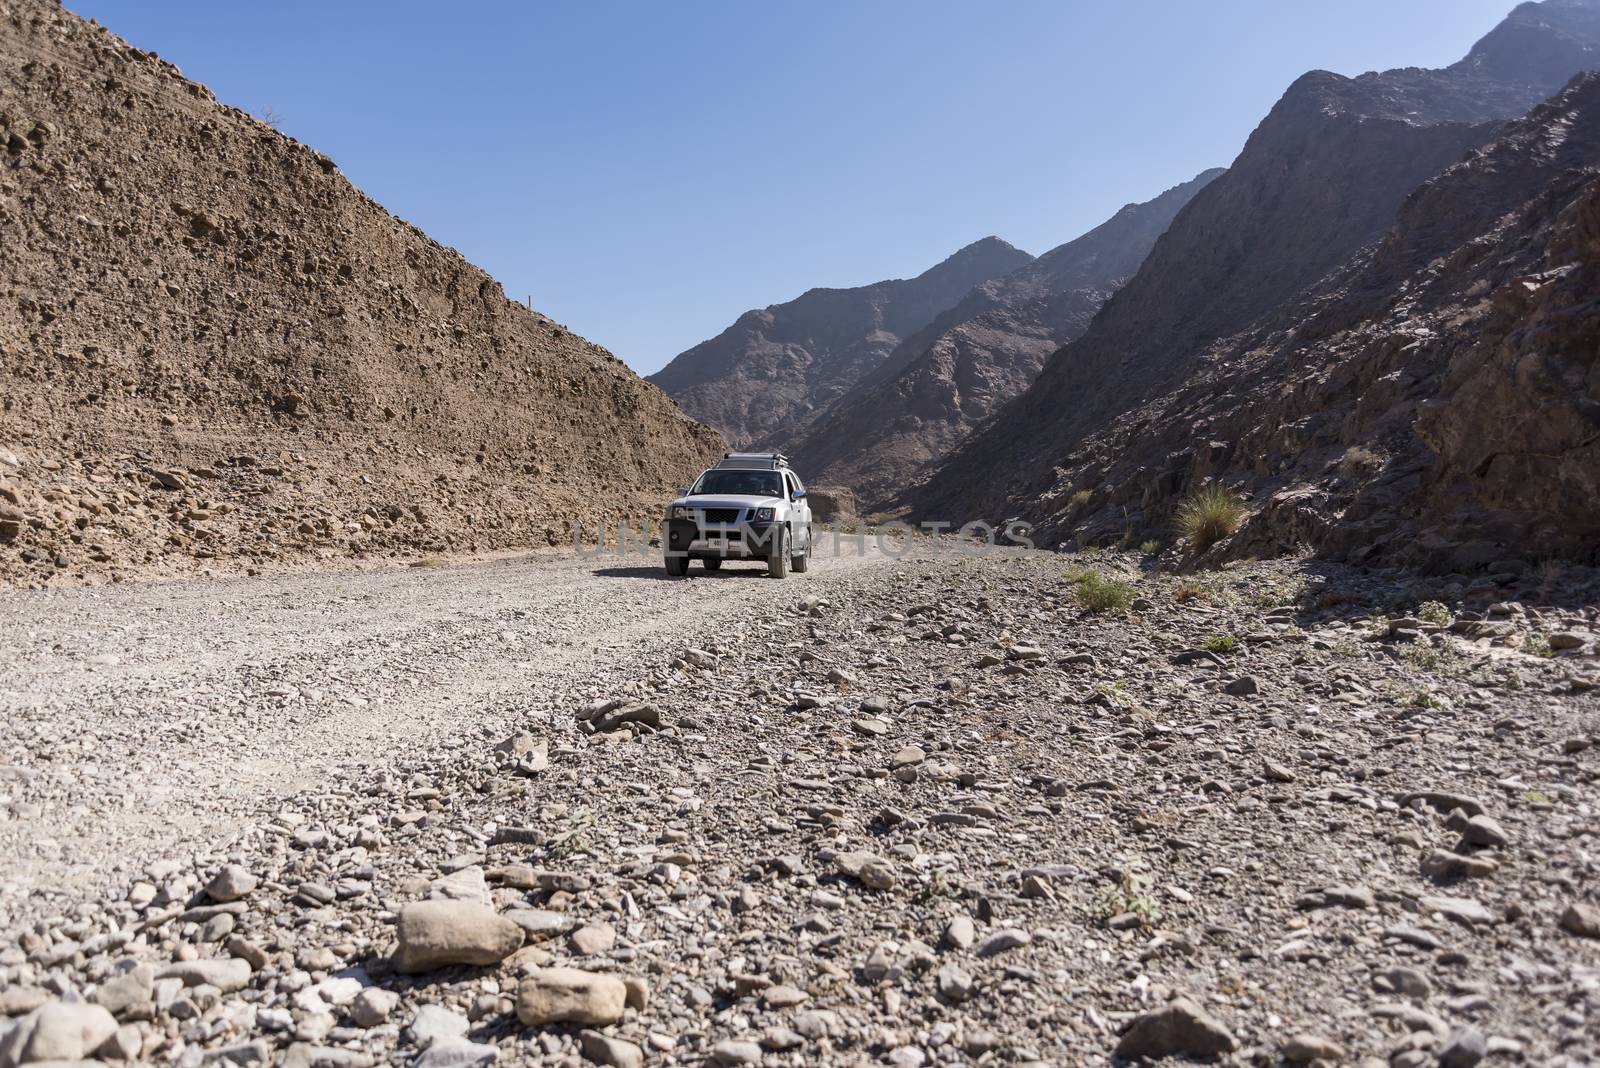 4x4 vehicle in a Wadi (dry riverbed) of Fujairah Emirates, UAE by GABIS